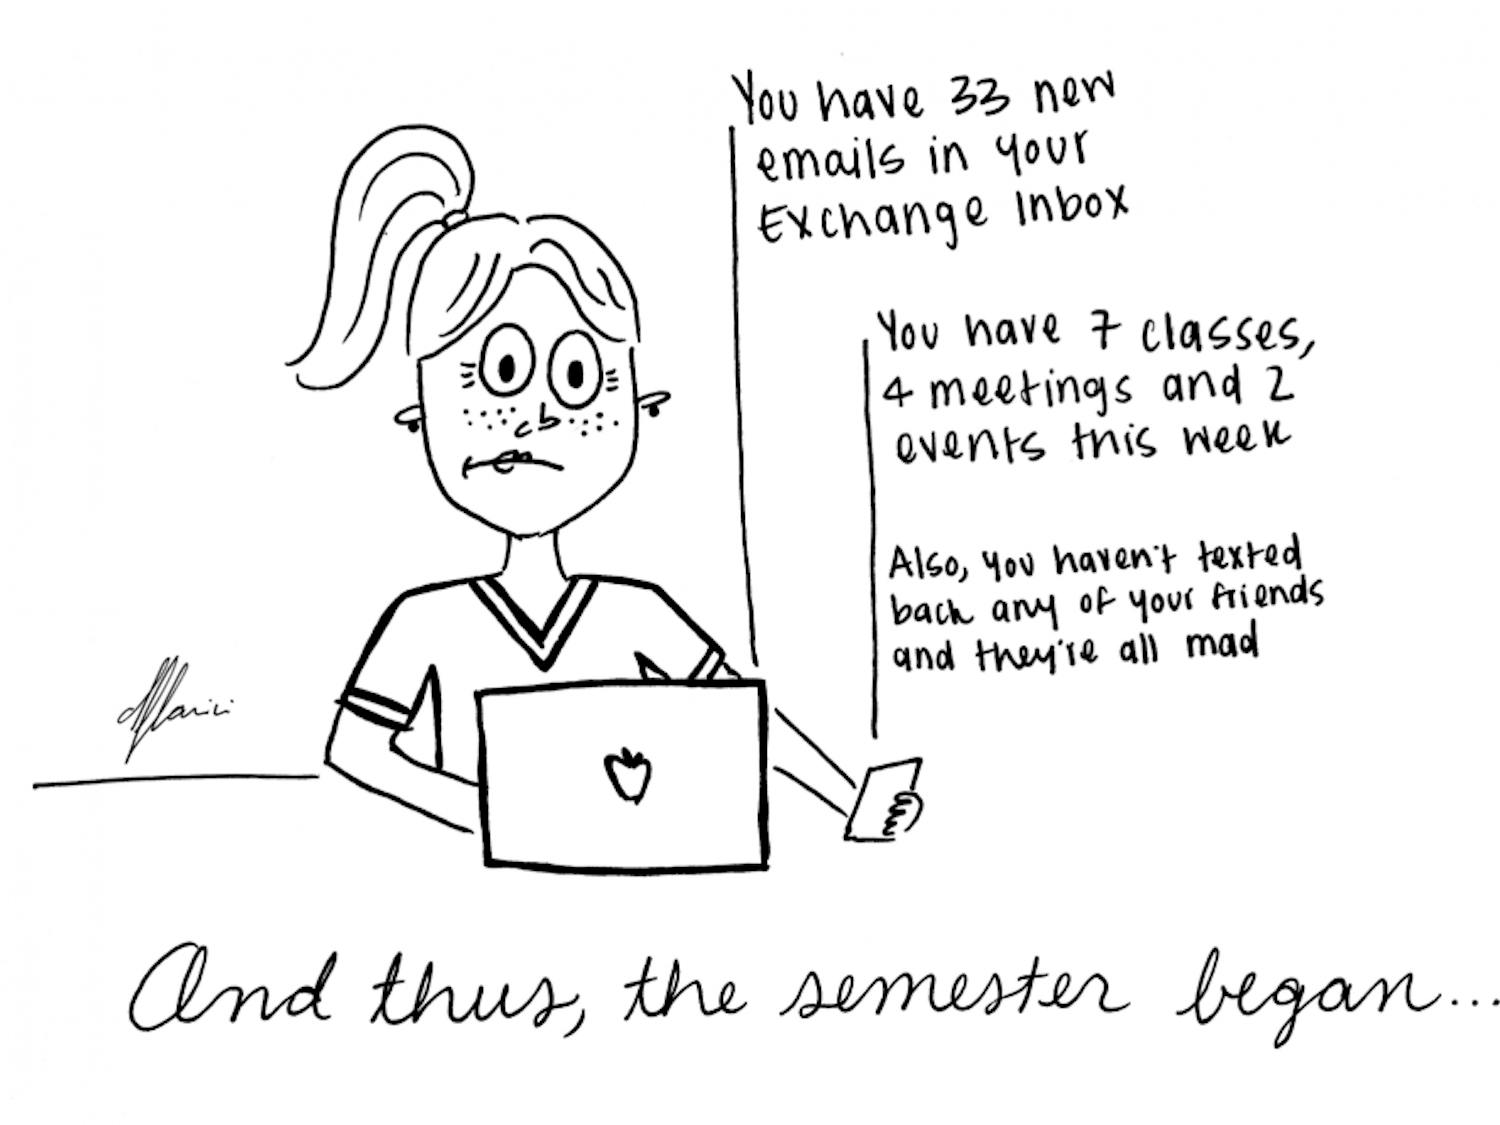 Semester woes